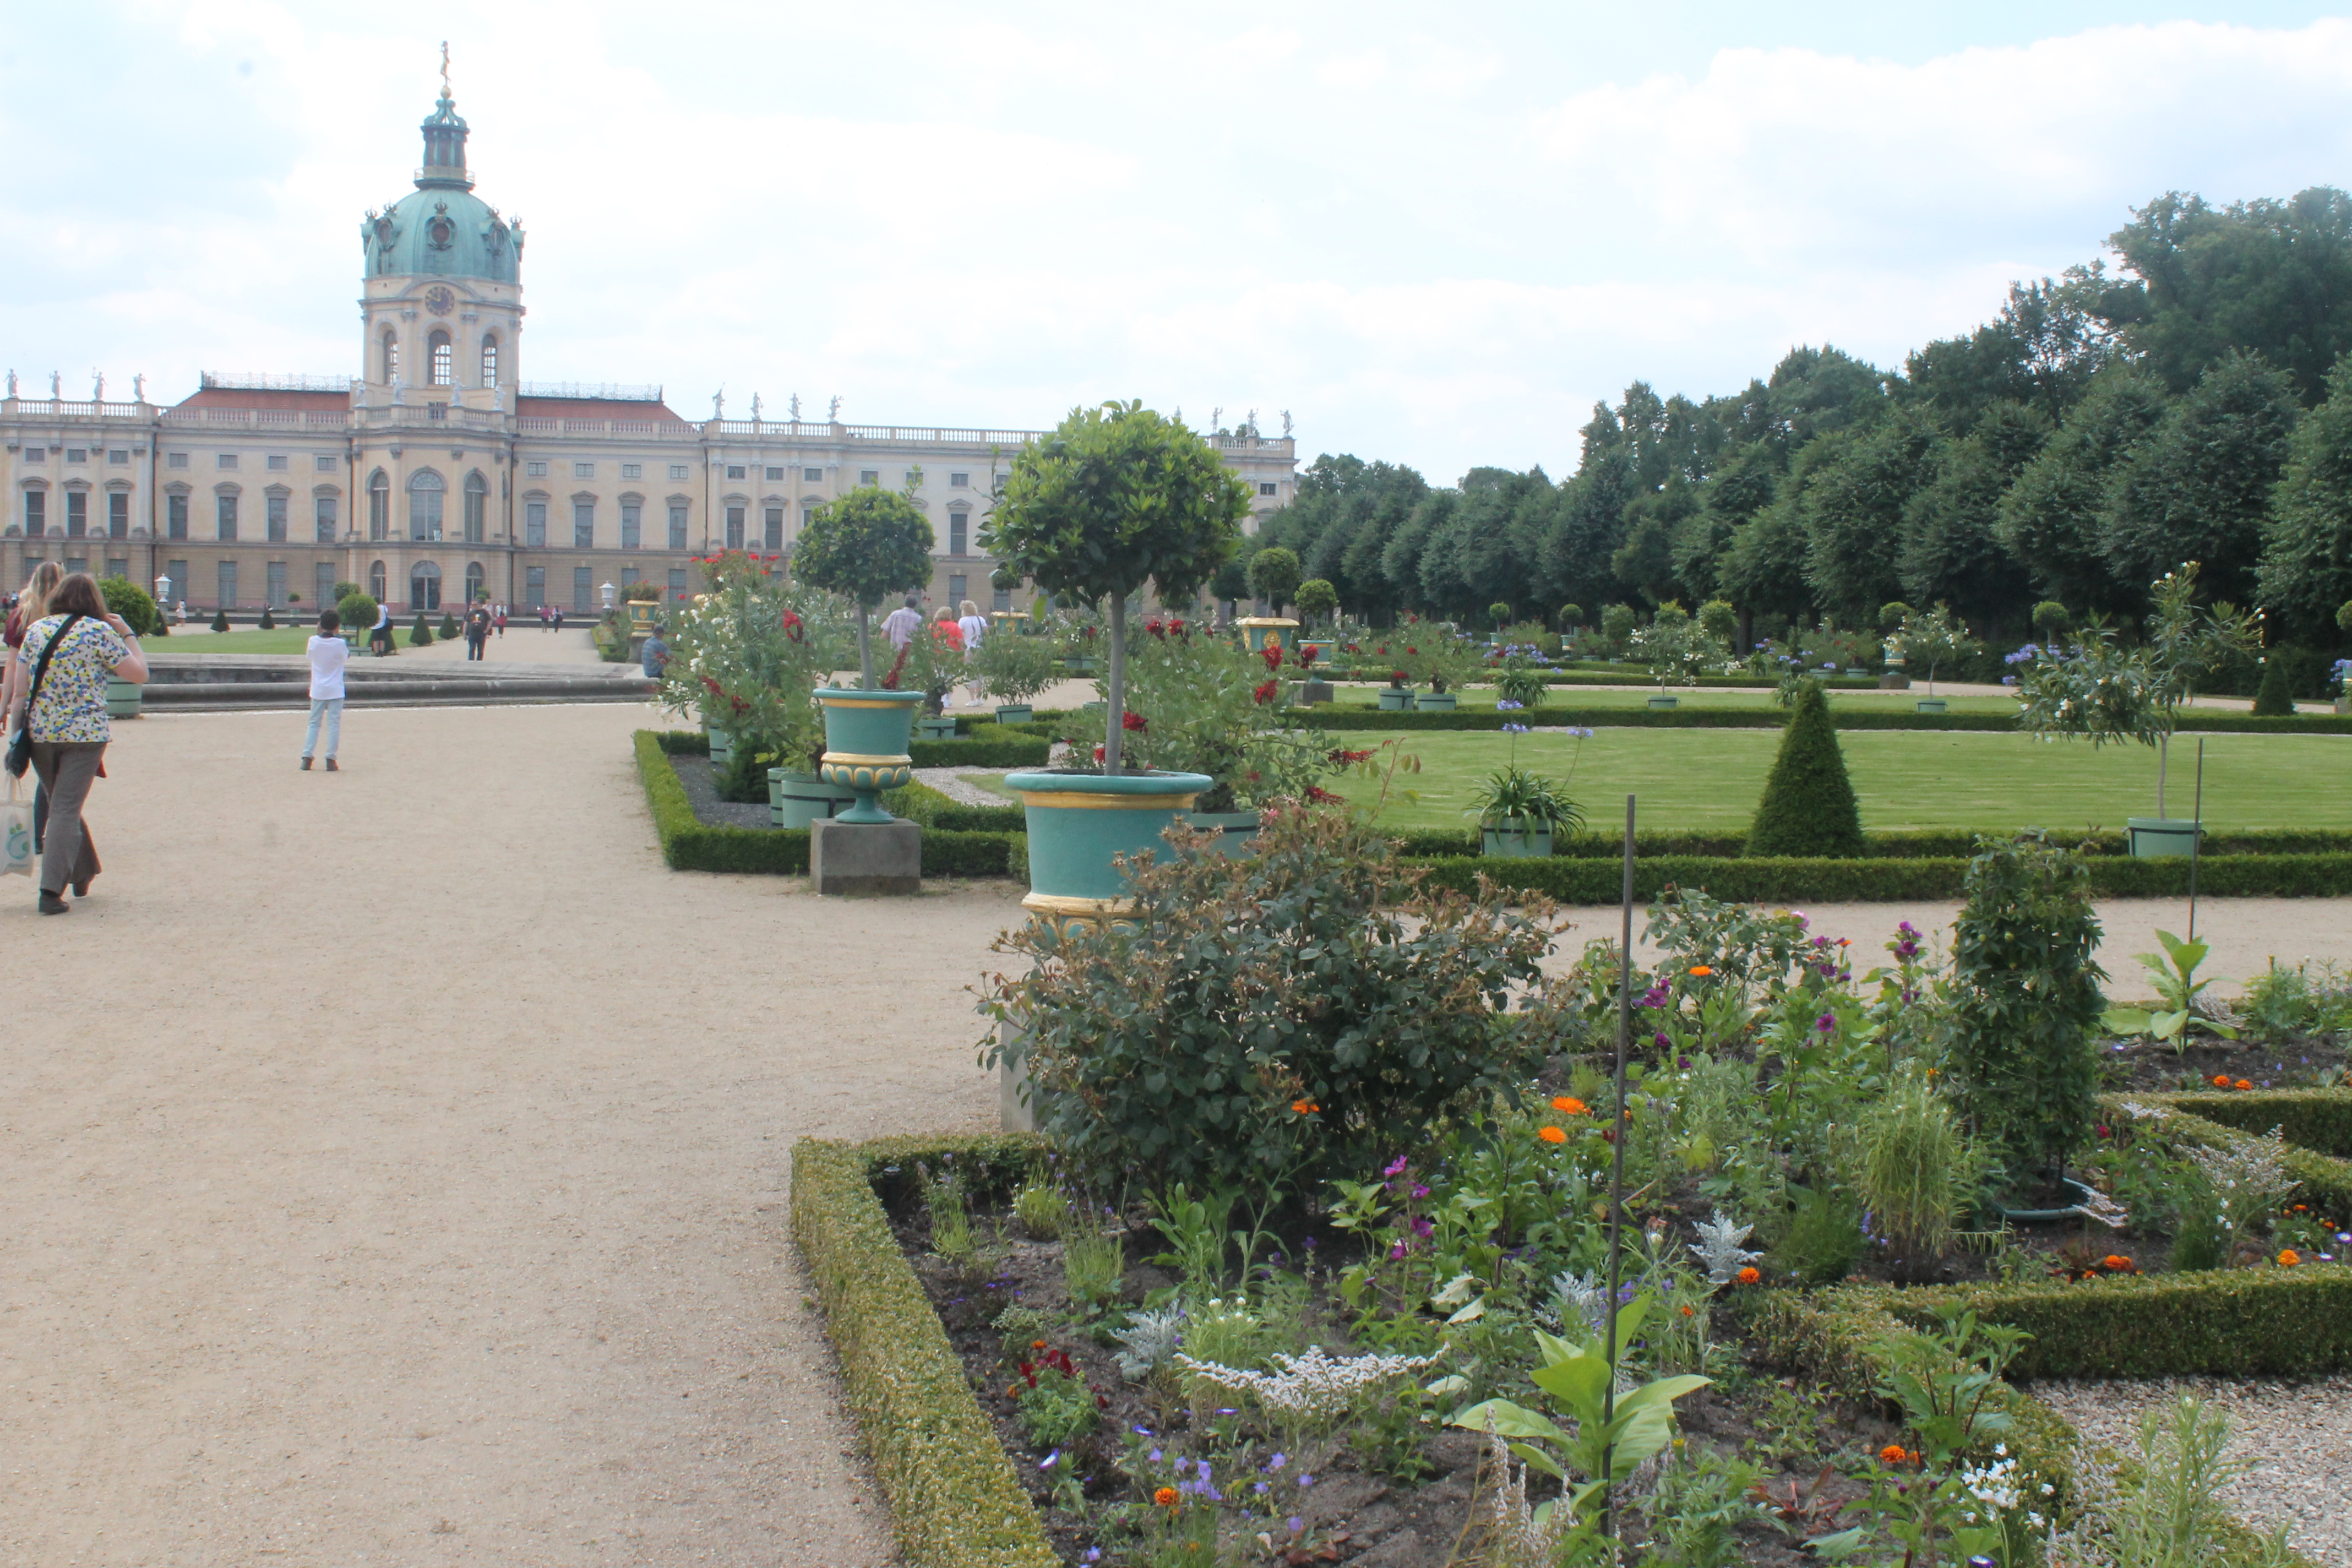 Schloss Charlottenburg Berlin, built 1695 (while Dyrham was being constructed) built for Sophie Charlotte, wife of Frederick III Elector of Brandonberg. The gardens near the house are maintained in the style that Dyrham's formal gardens originally had.